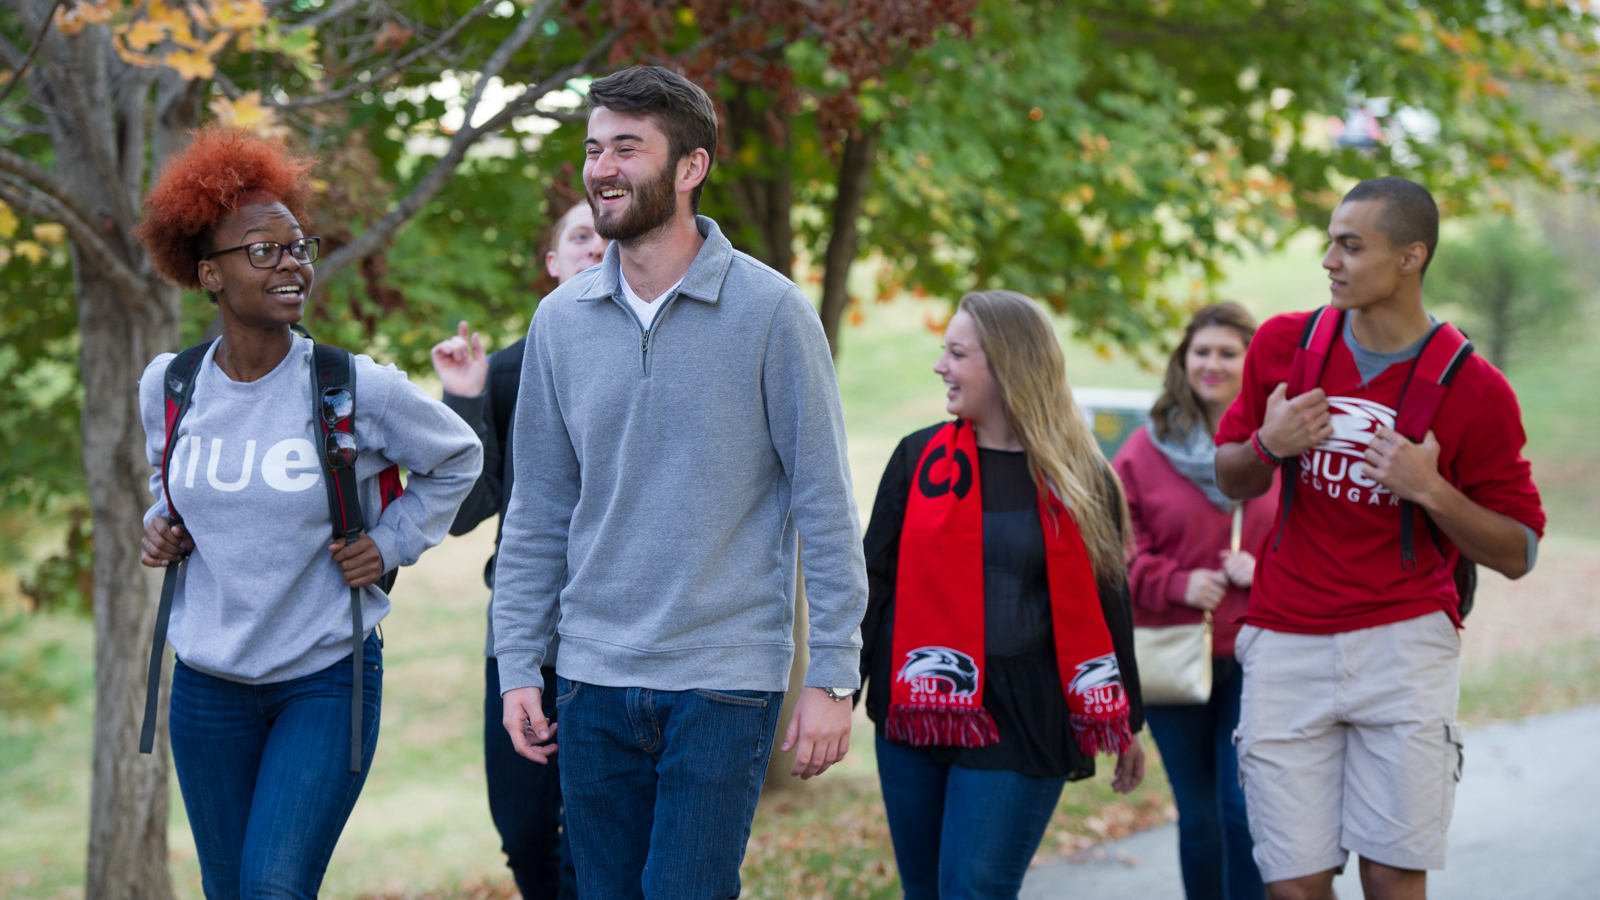 SIUE students walking on campus.